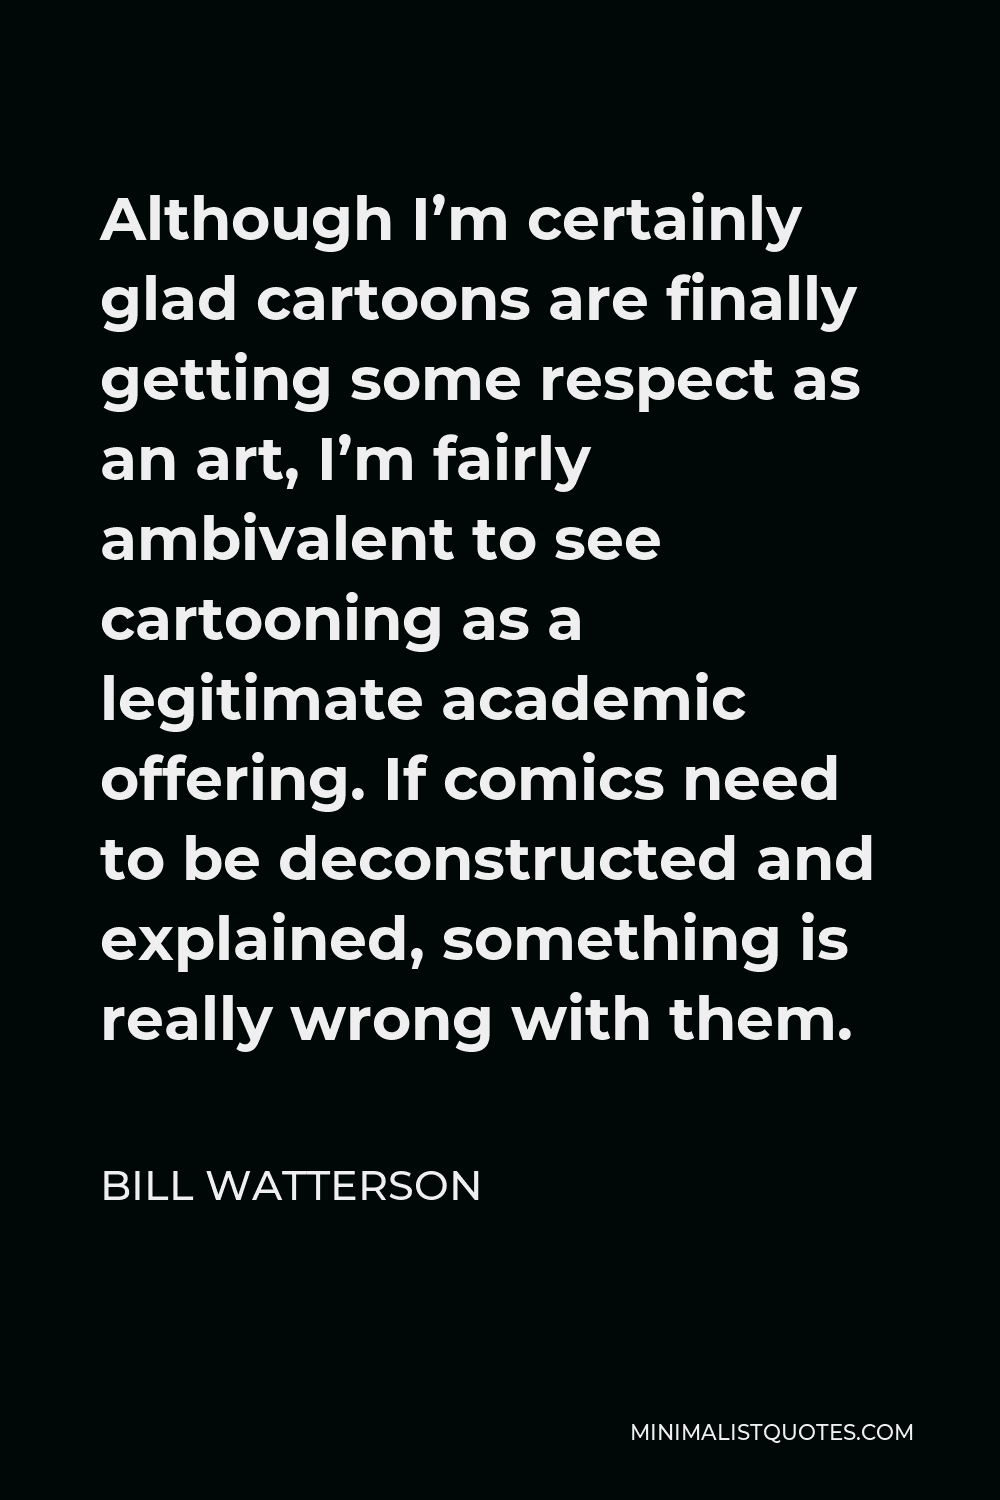 Bill Watterson Quote - Although I’m certainly glad cartoons are finally getting some respect as an art, I’m fairly ambivalent to see cartooning as a legitimate academic offering. If comics need to be deconstructed and explained, something is really wrong with them.